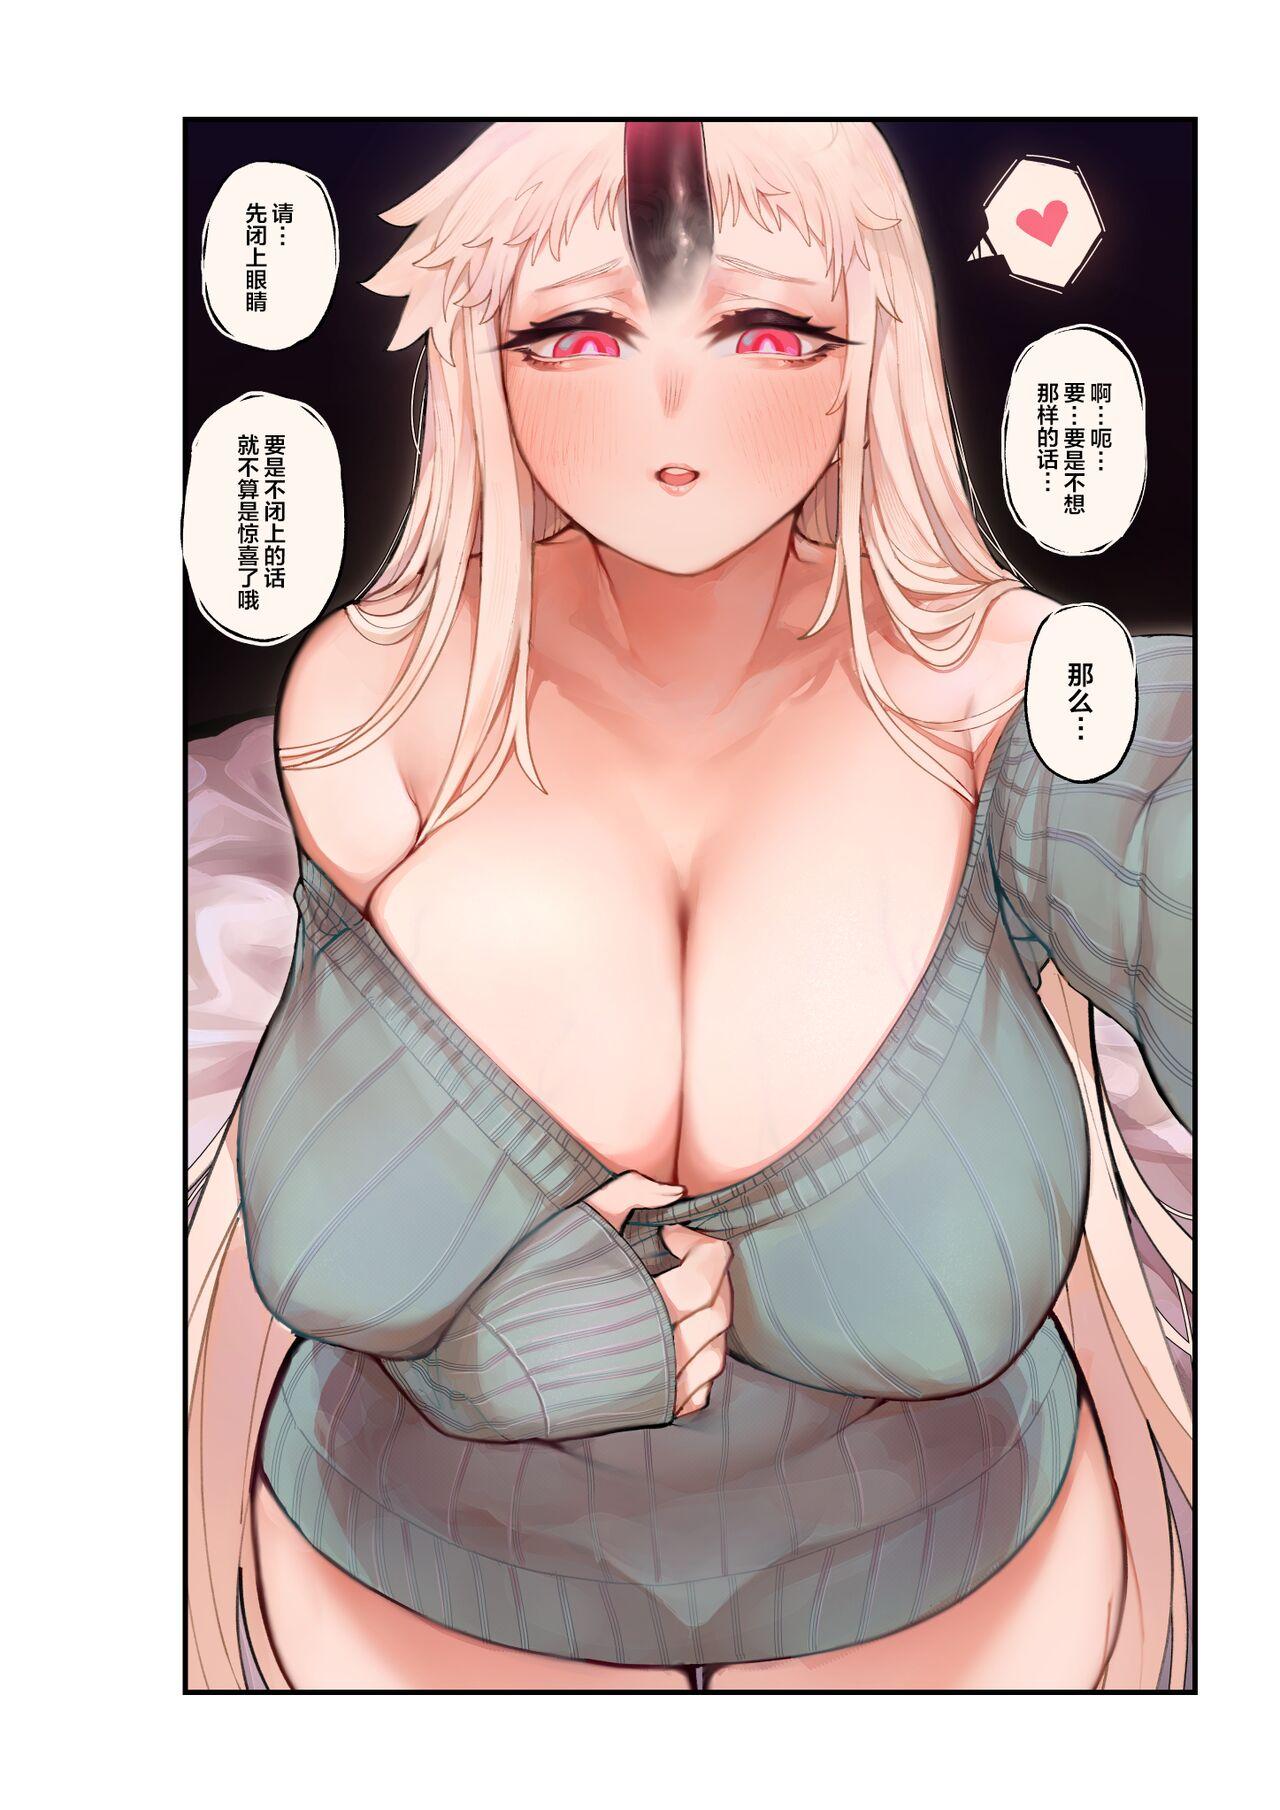 Gay Dudes Always SIMP my darling, Pale Harbour | 我所痴爱着的，港湾栖姬 - Kantai collection Nasty - Page 9